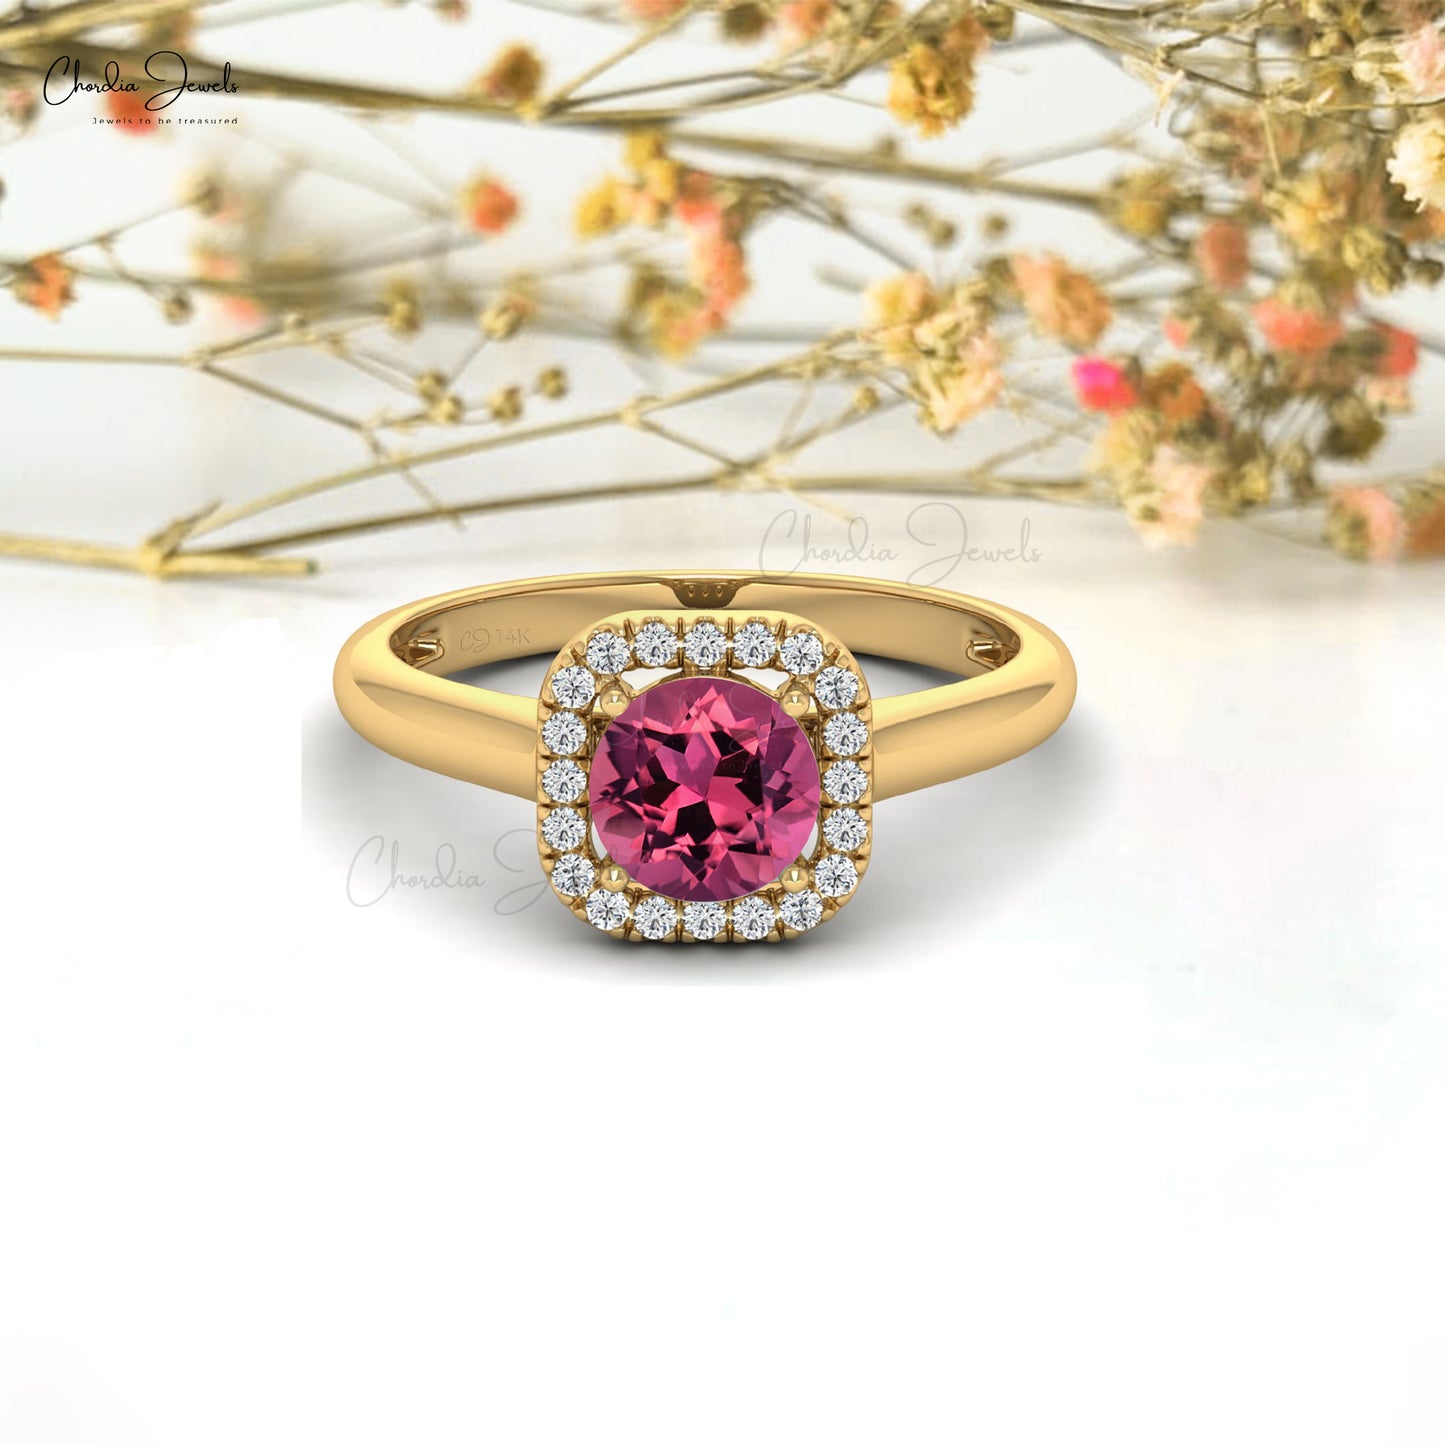 6mm Round Cut Natural Pink Tourmaline and Diamond Dainty Ring, 14k Solid Gold Sharing Prong Gemstone Ring For Her